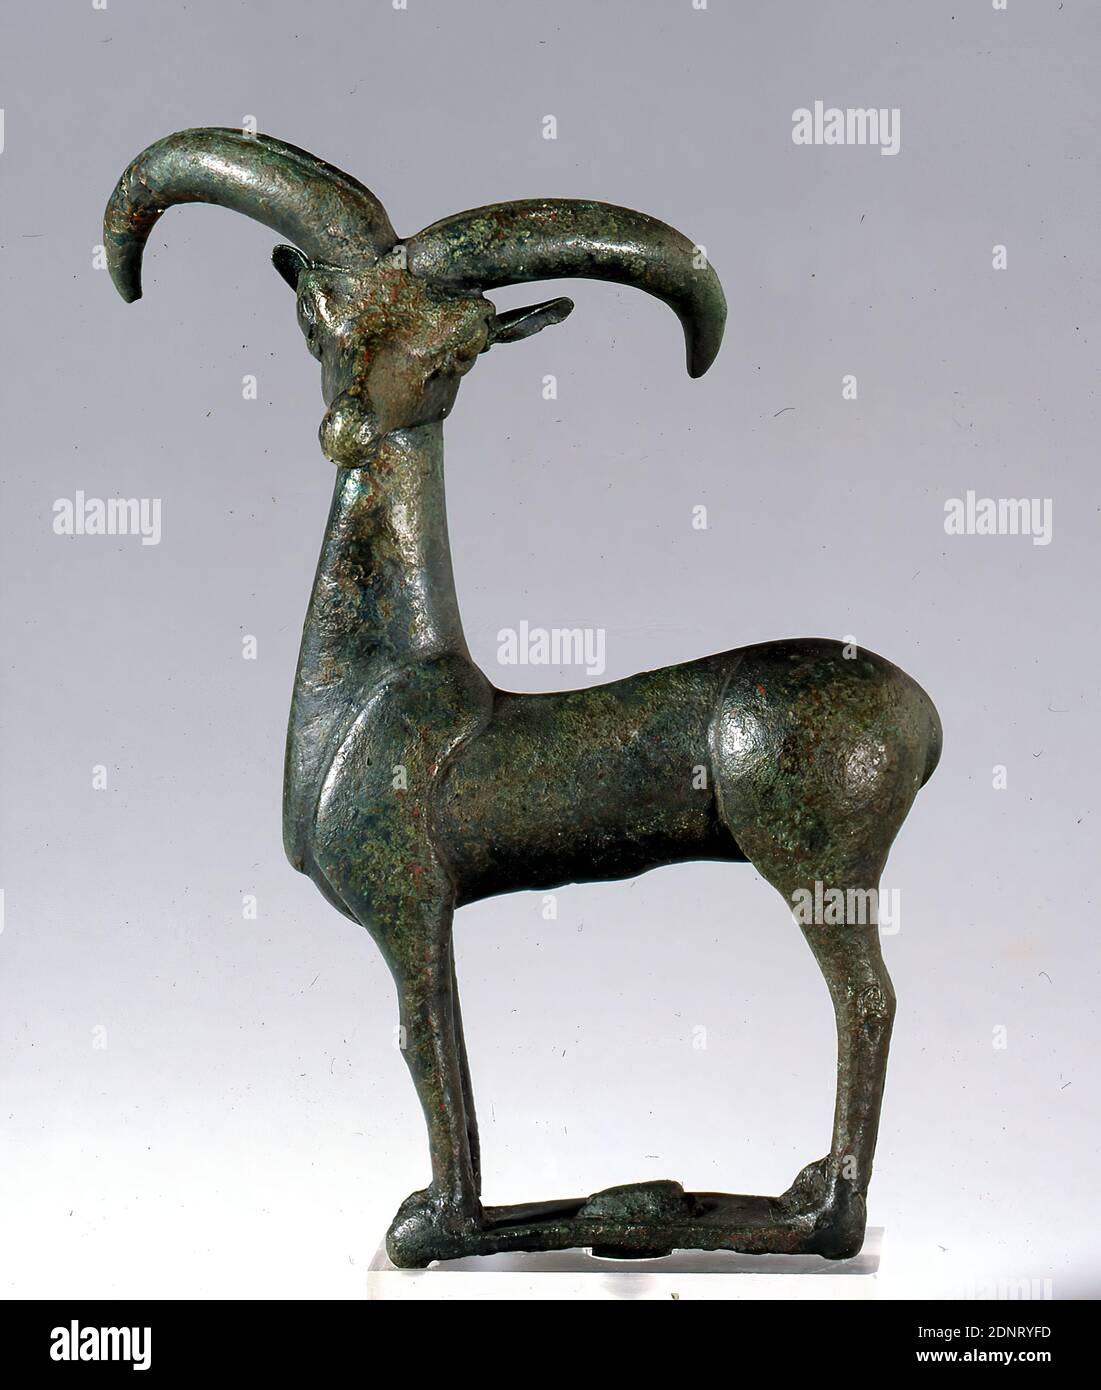 Statuette of a mouflon, property of the Stiftung Hamburger Kunstsammlungen, bronze, cast, bronze, Total: Height: 15.3 cm; Width: 6.2 cm; Depth: 2.4 cm, small sculptures, sheep, antique, The animal stands on a flat, square base in a calm, frontal posture with its head turned to the side. Its powerful horns form an effective contrast to the delicate ears. The animal's broad forehead, its large, attentive eyes as well as its slender muzzle, modelled with great sensitivity, are striking. Compared with the head, the body appears strongly simplified. Stock Photo